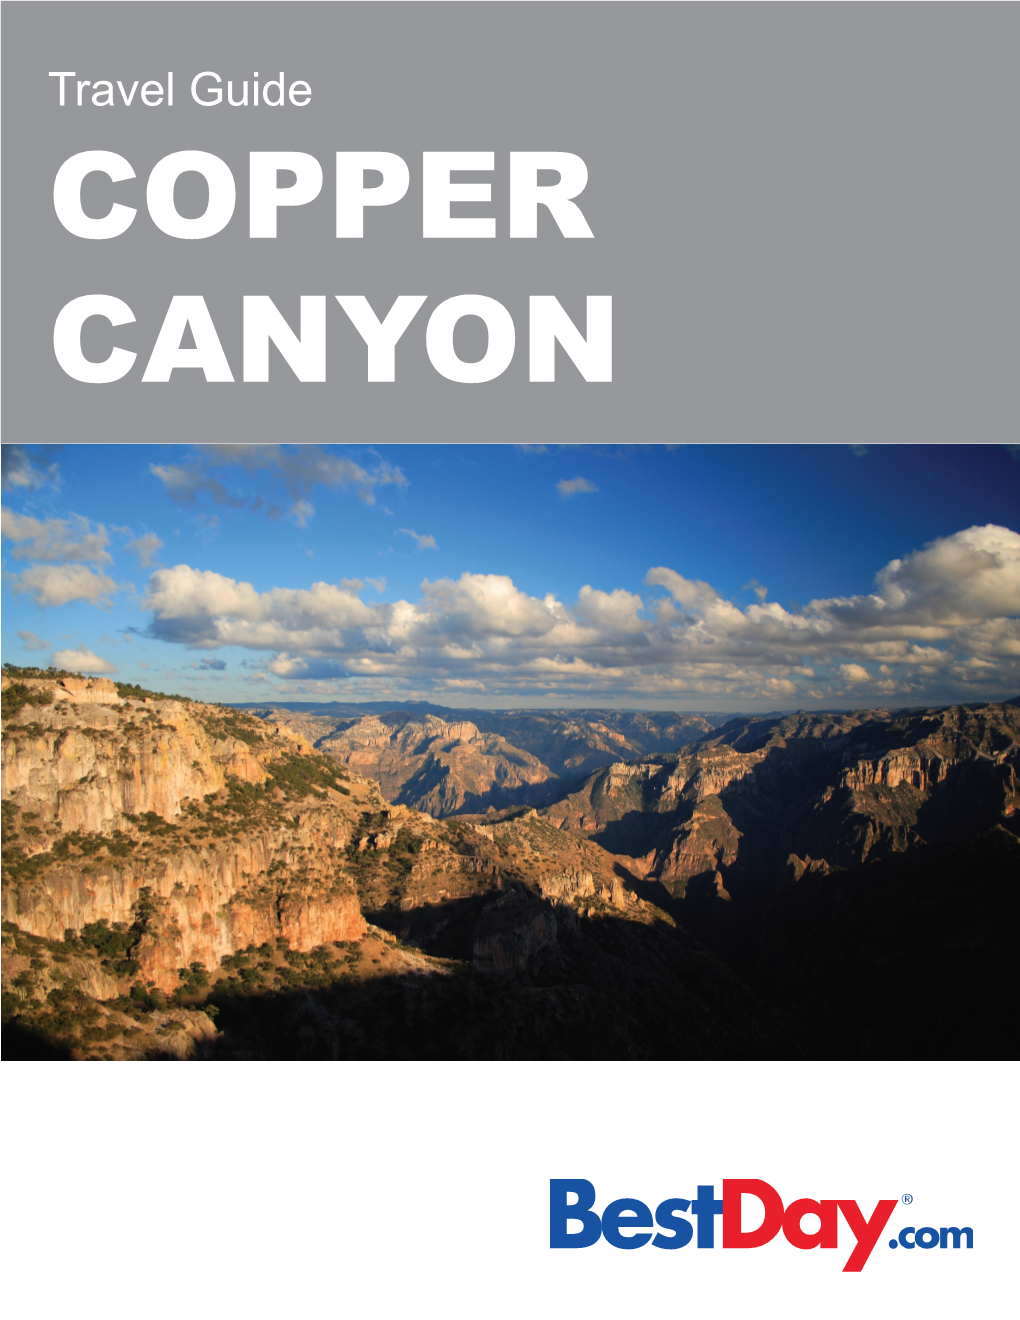 Travel Guide COPPER CANYON Contents